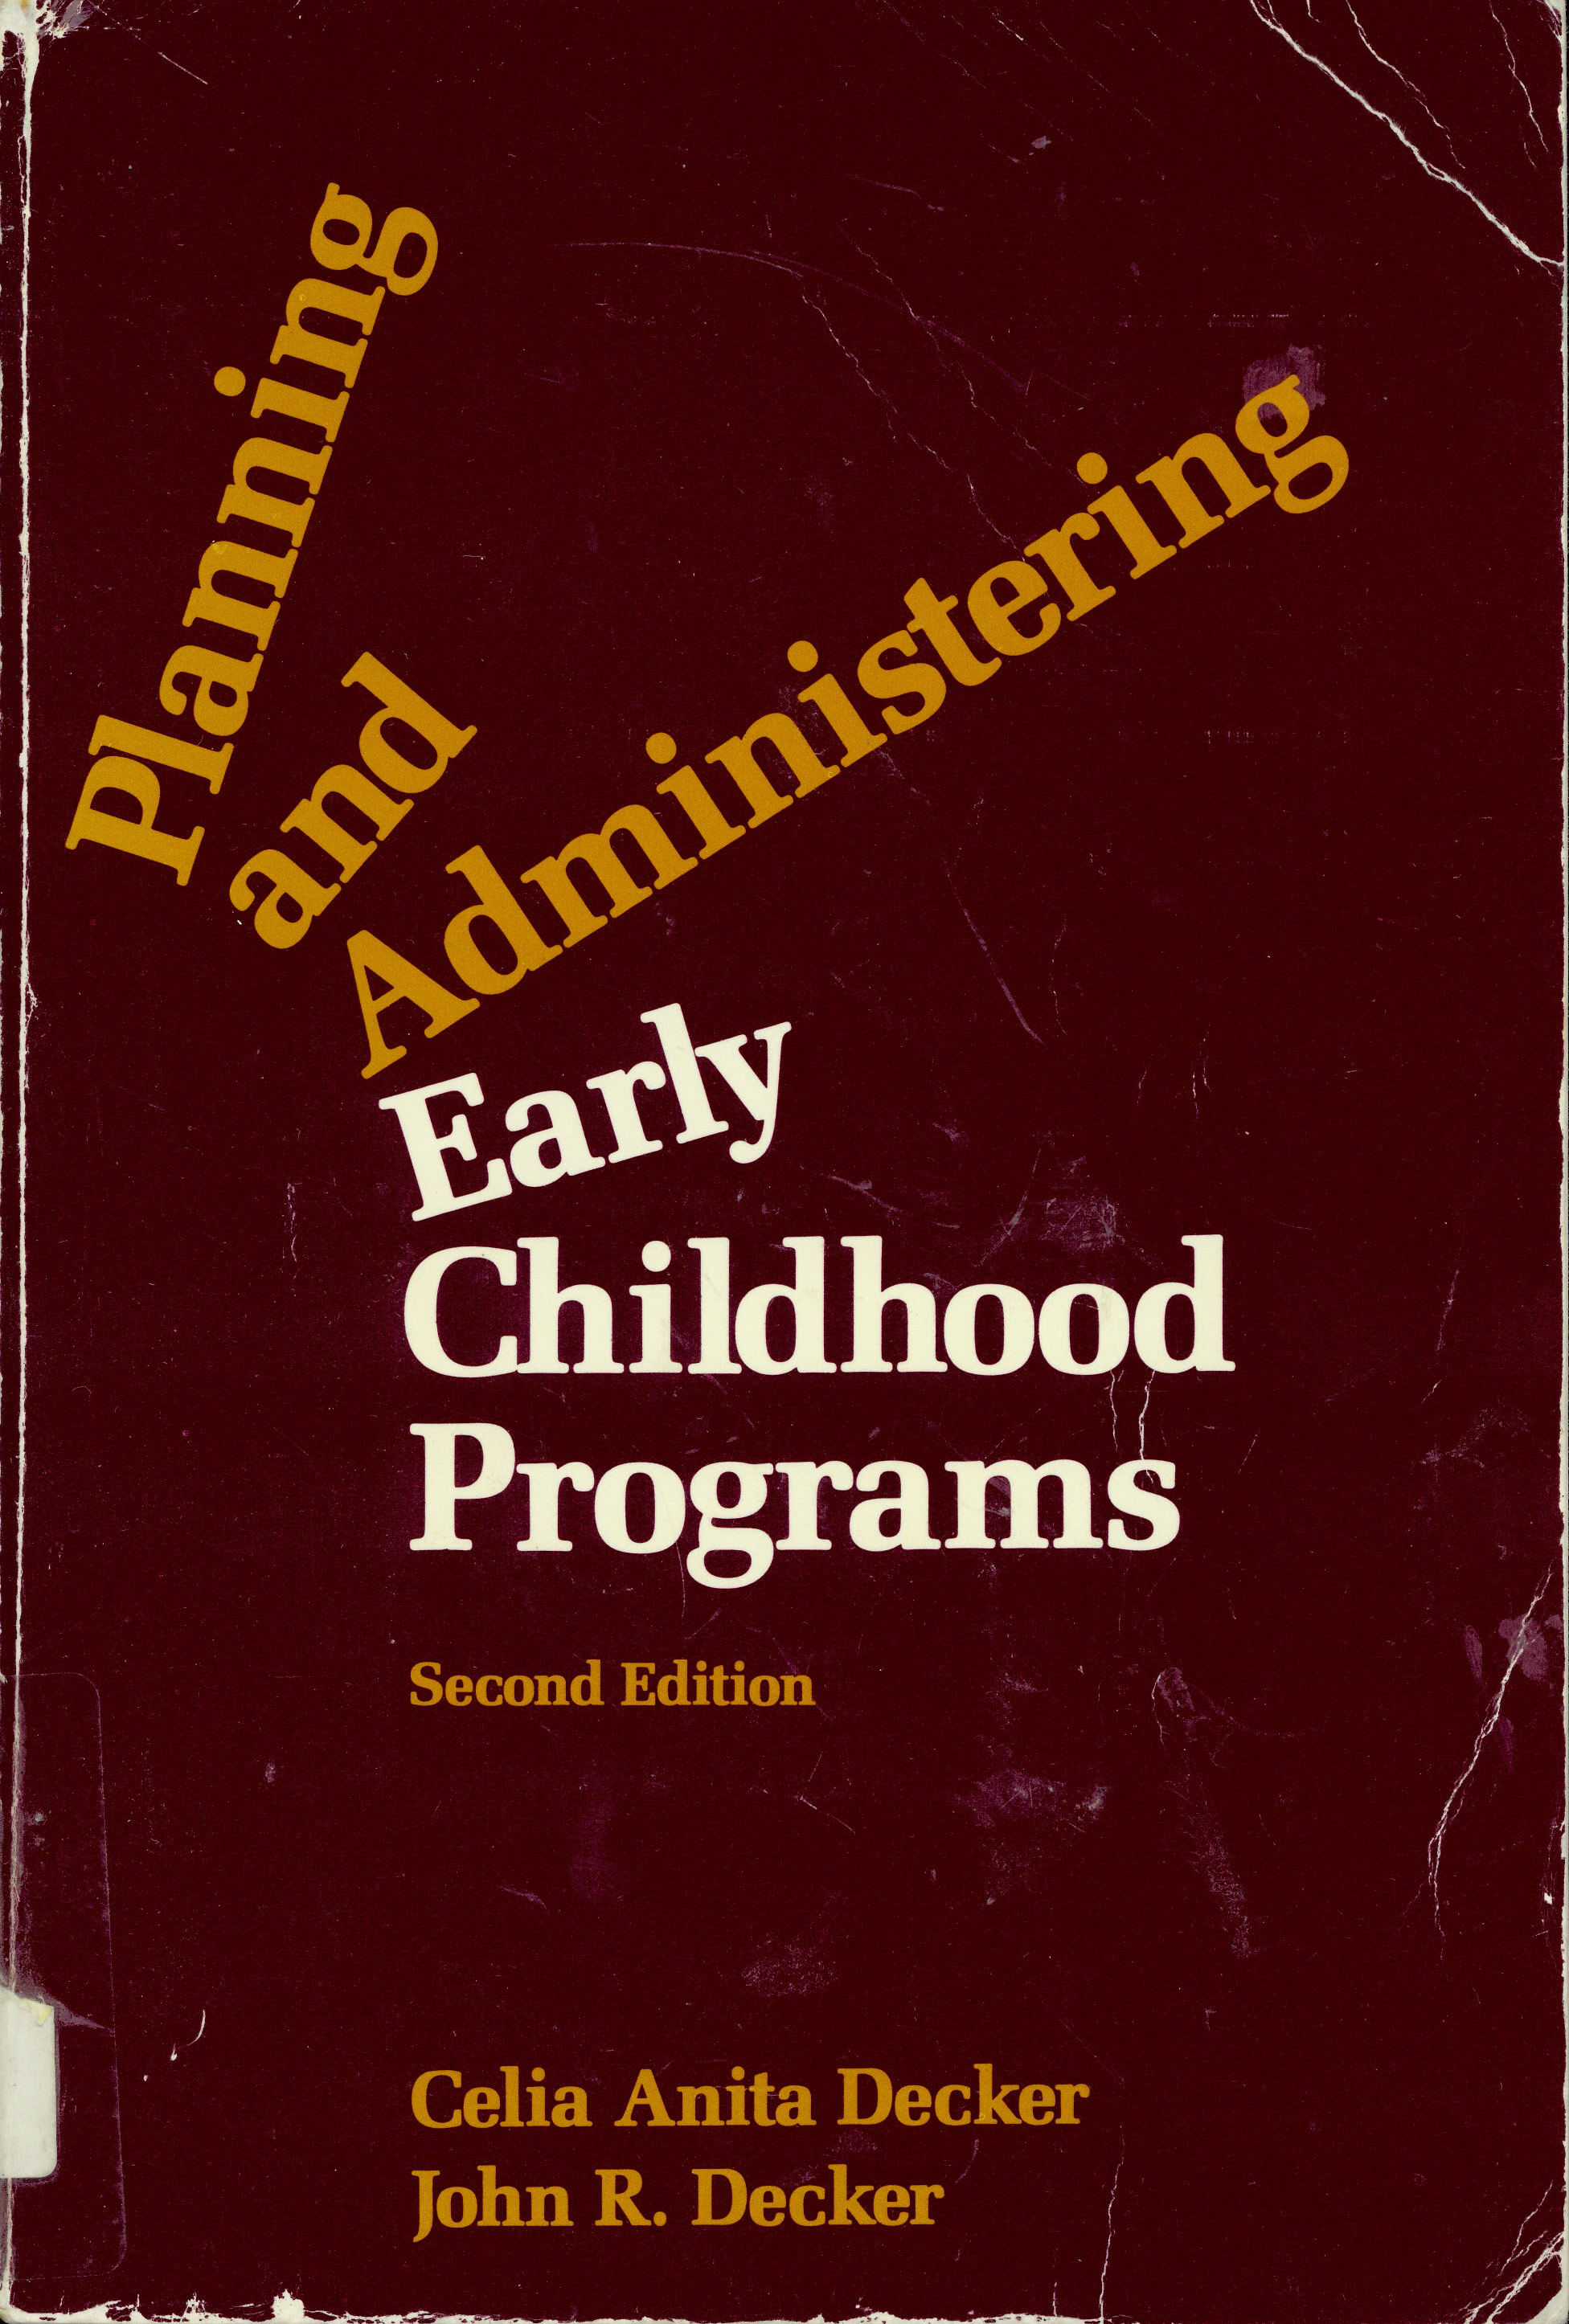 Planning and administering early childhood programs